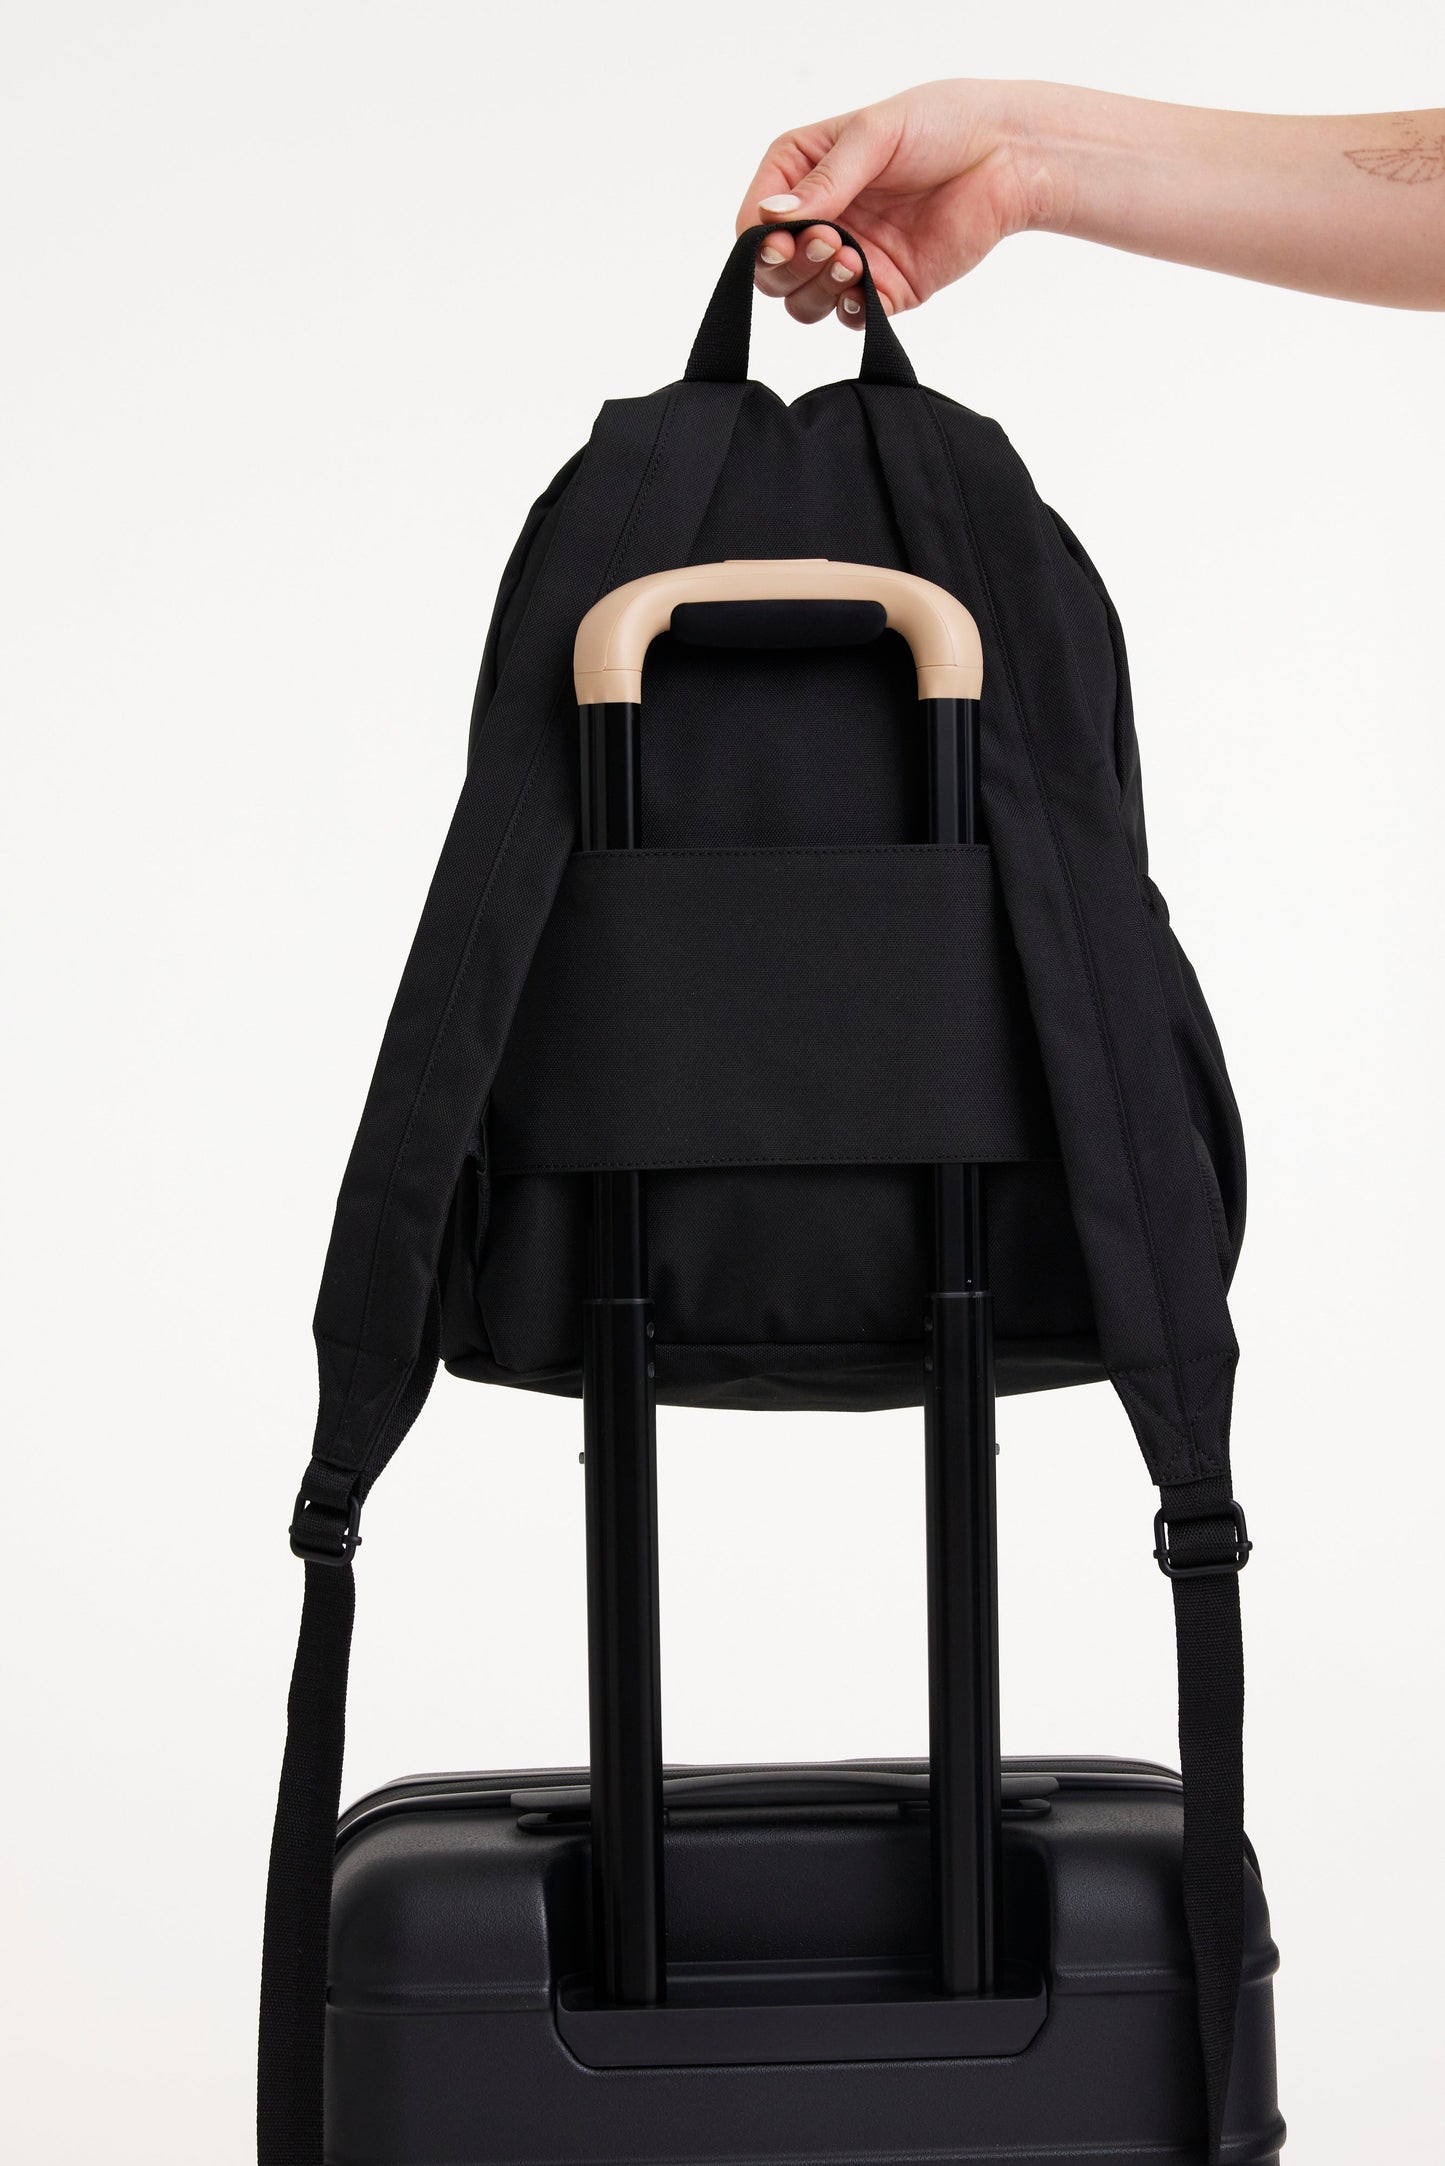 The BÉISics Backpack in Black